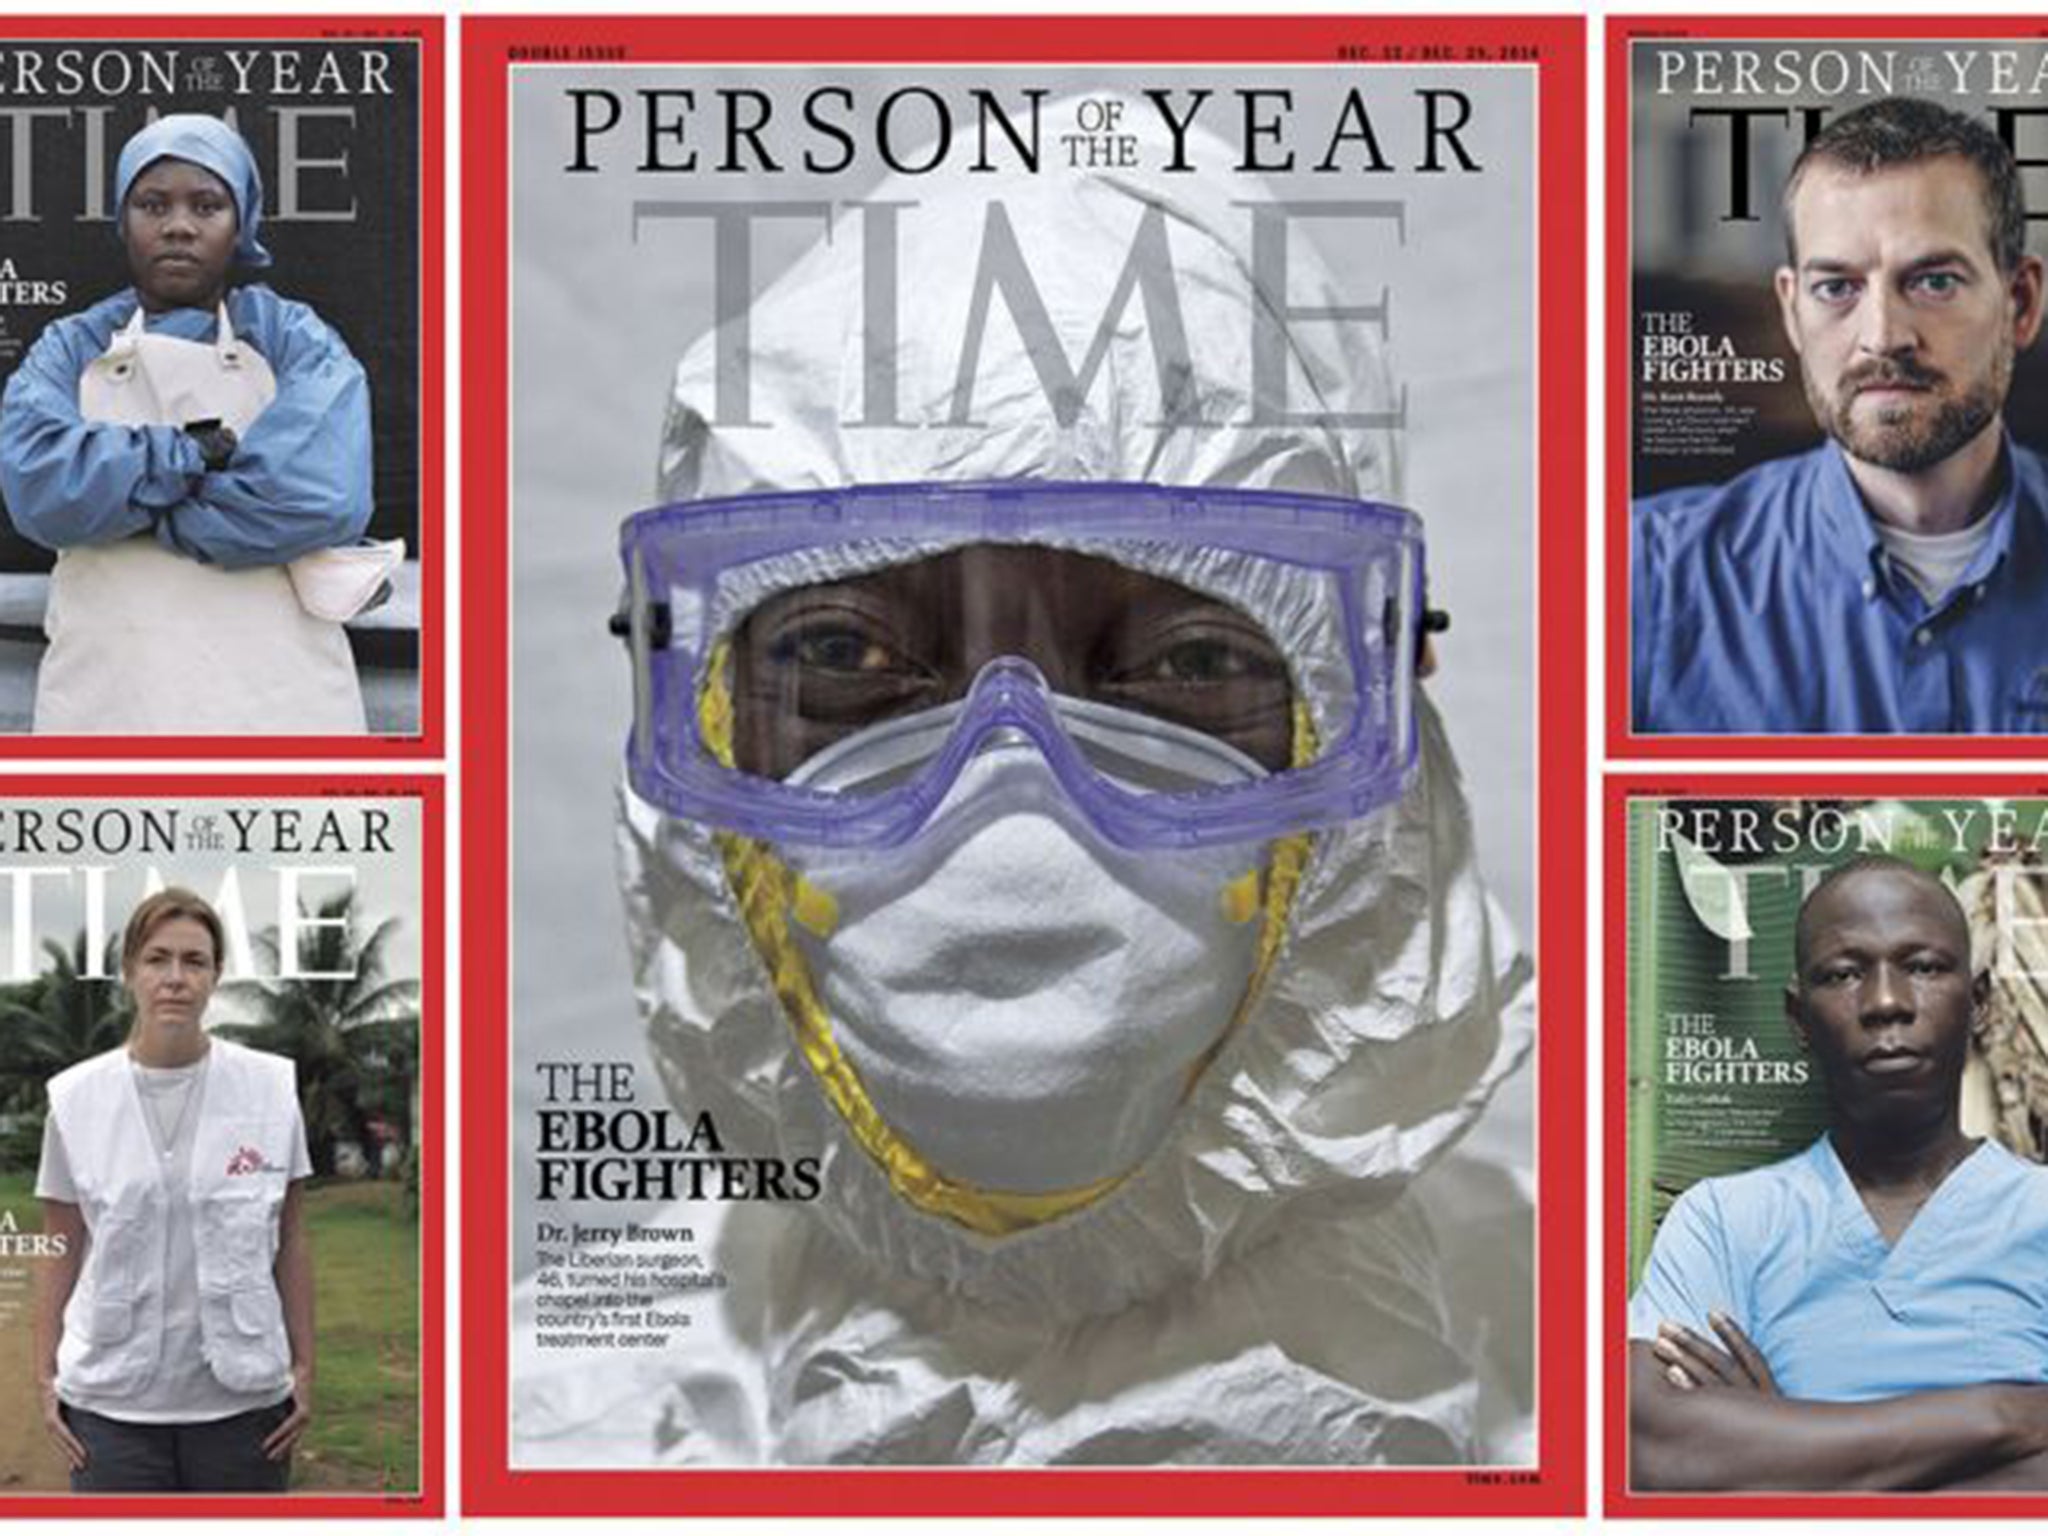 Ebola Fighters, Time magazine’s person of the year